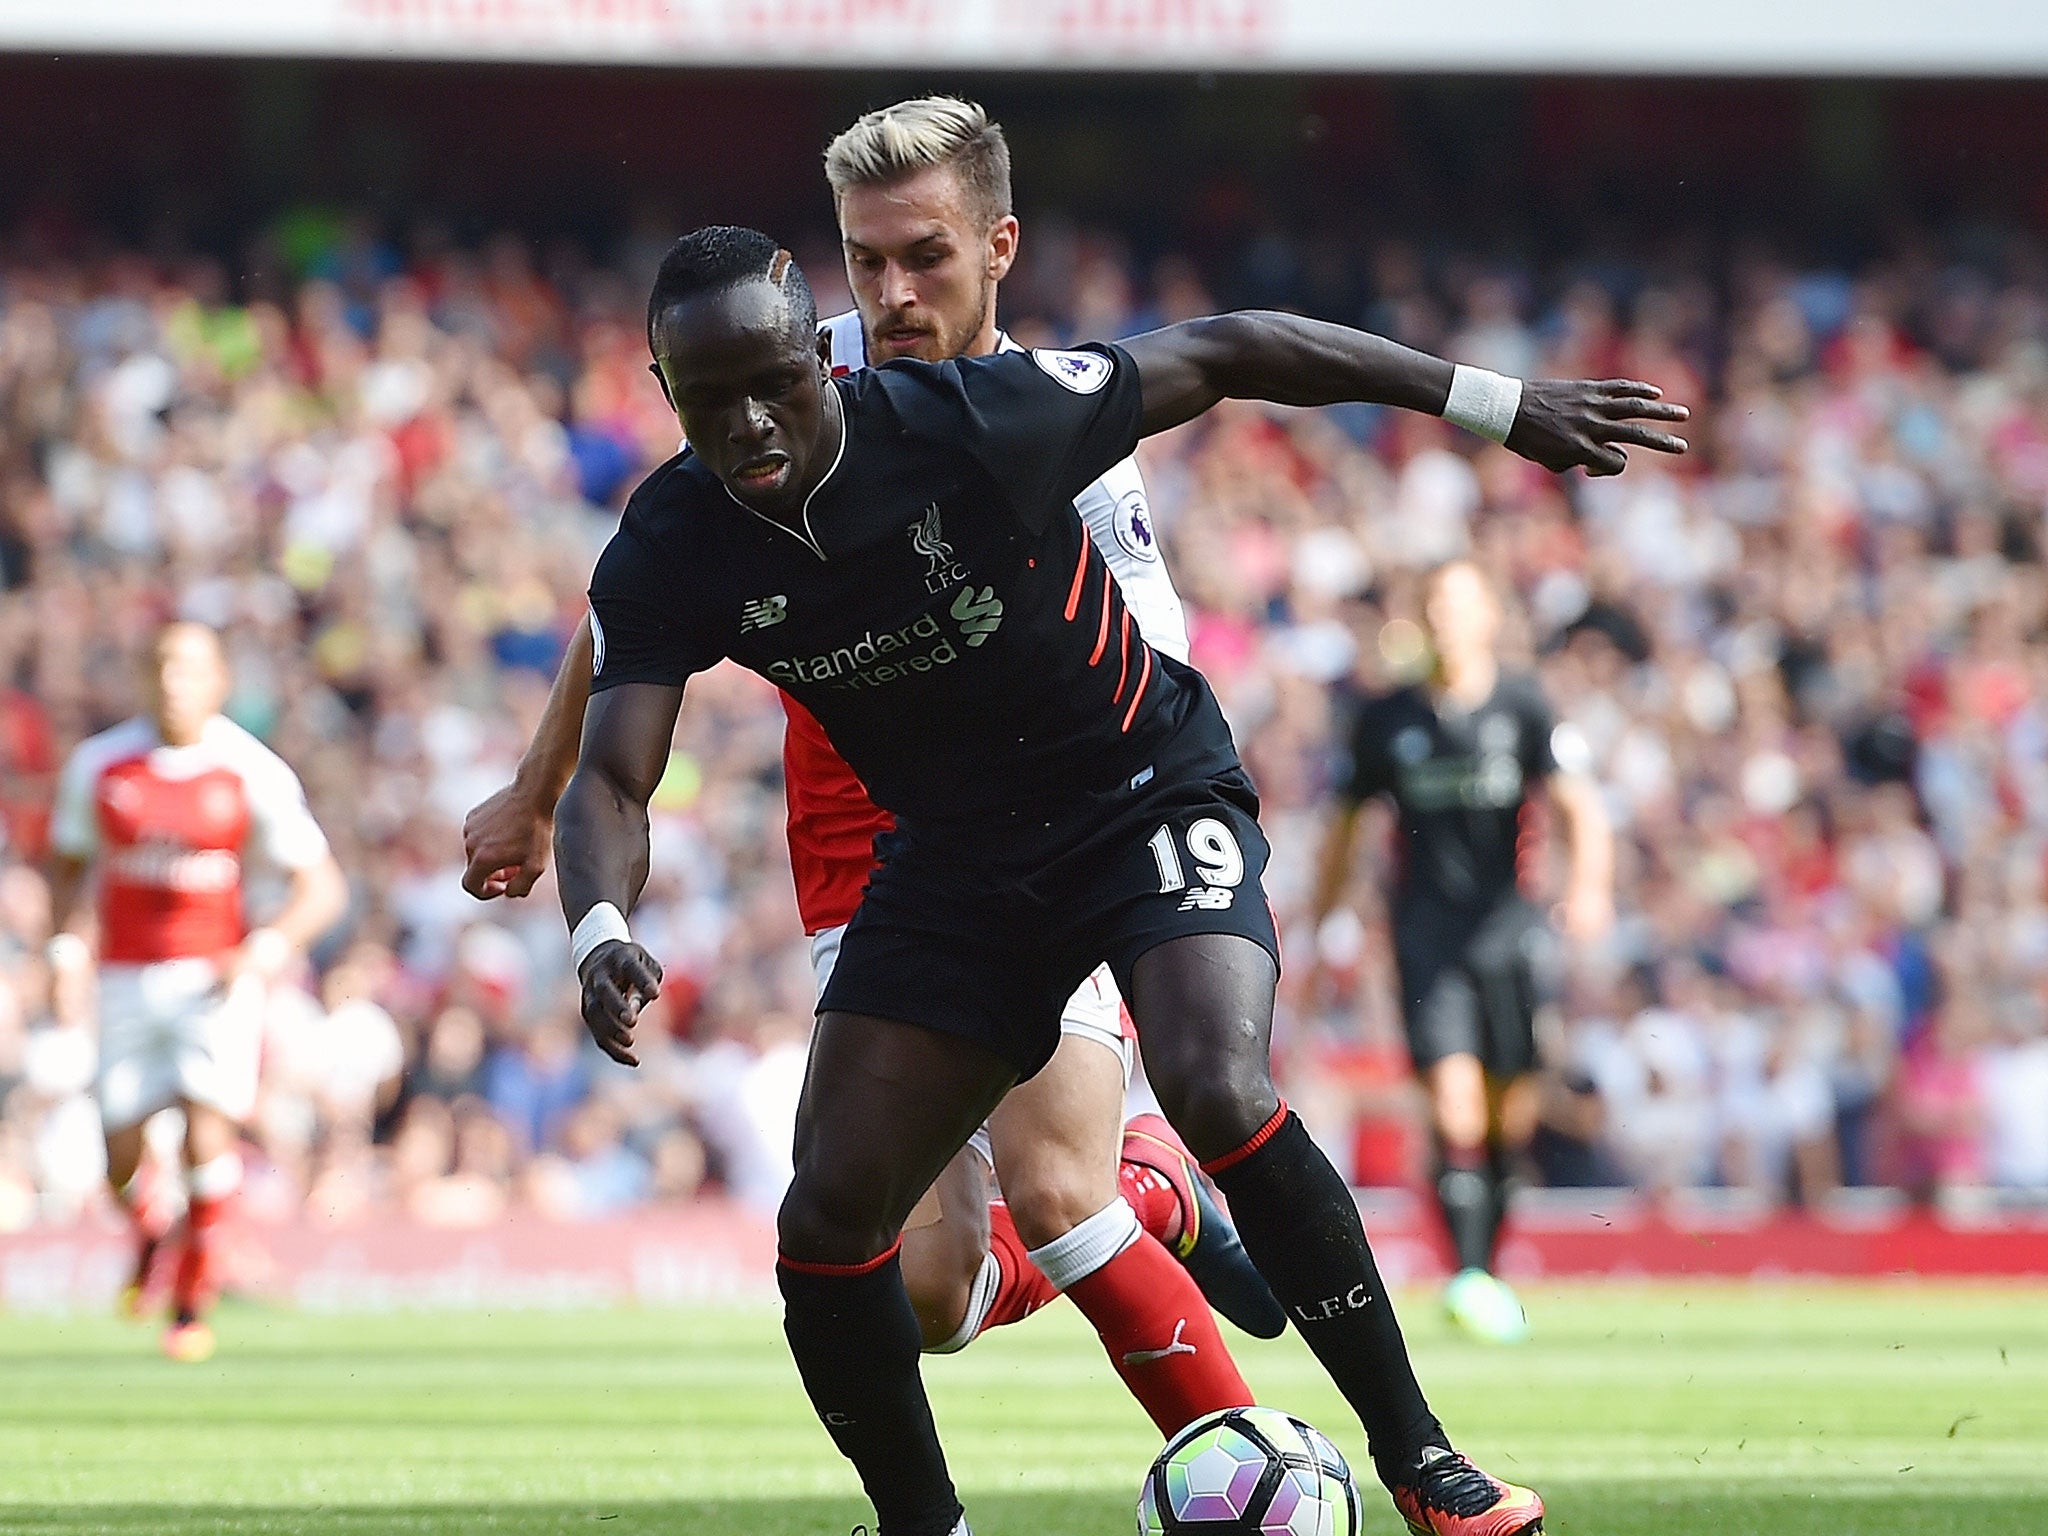 Mane scored and impressed on his debut against Arsenal